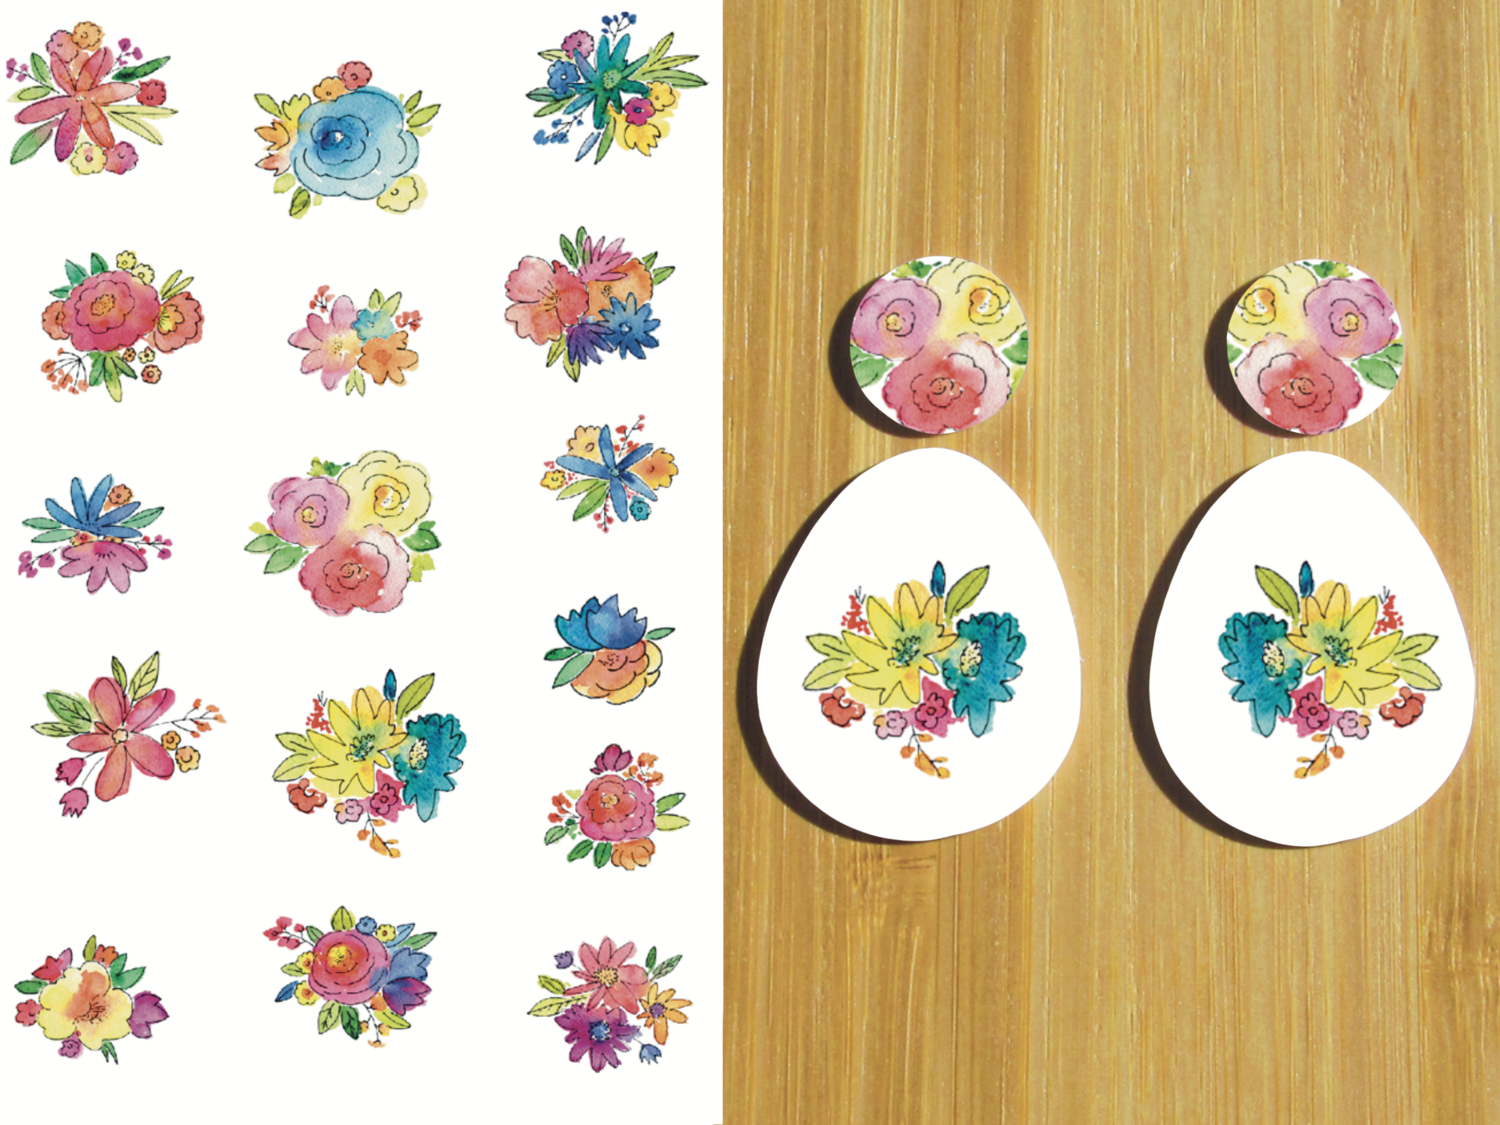 Two 3.5x5" Water Soluble Transfer Sheets for Polymer Clay / Mirrored Designs, Left & Right.
Small Watercolor Flowers T078